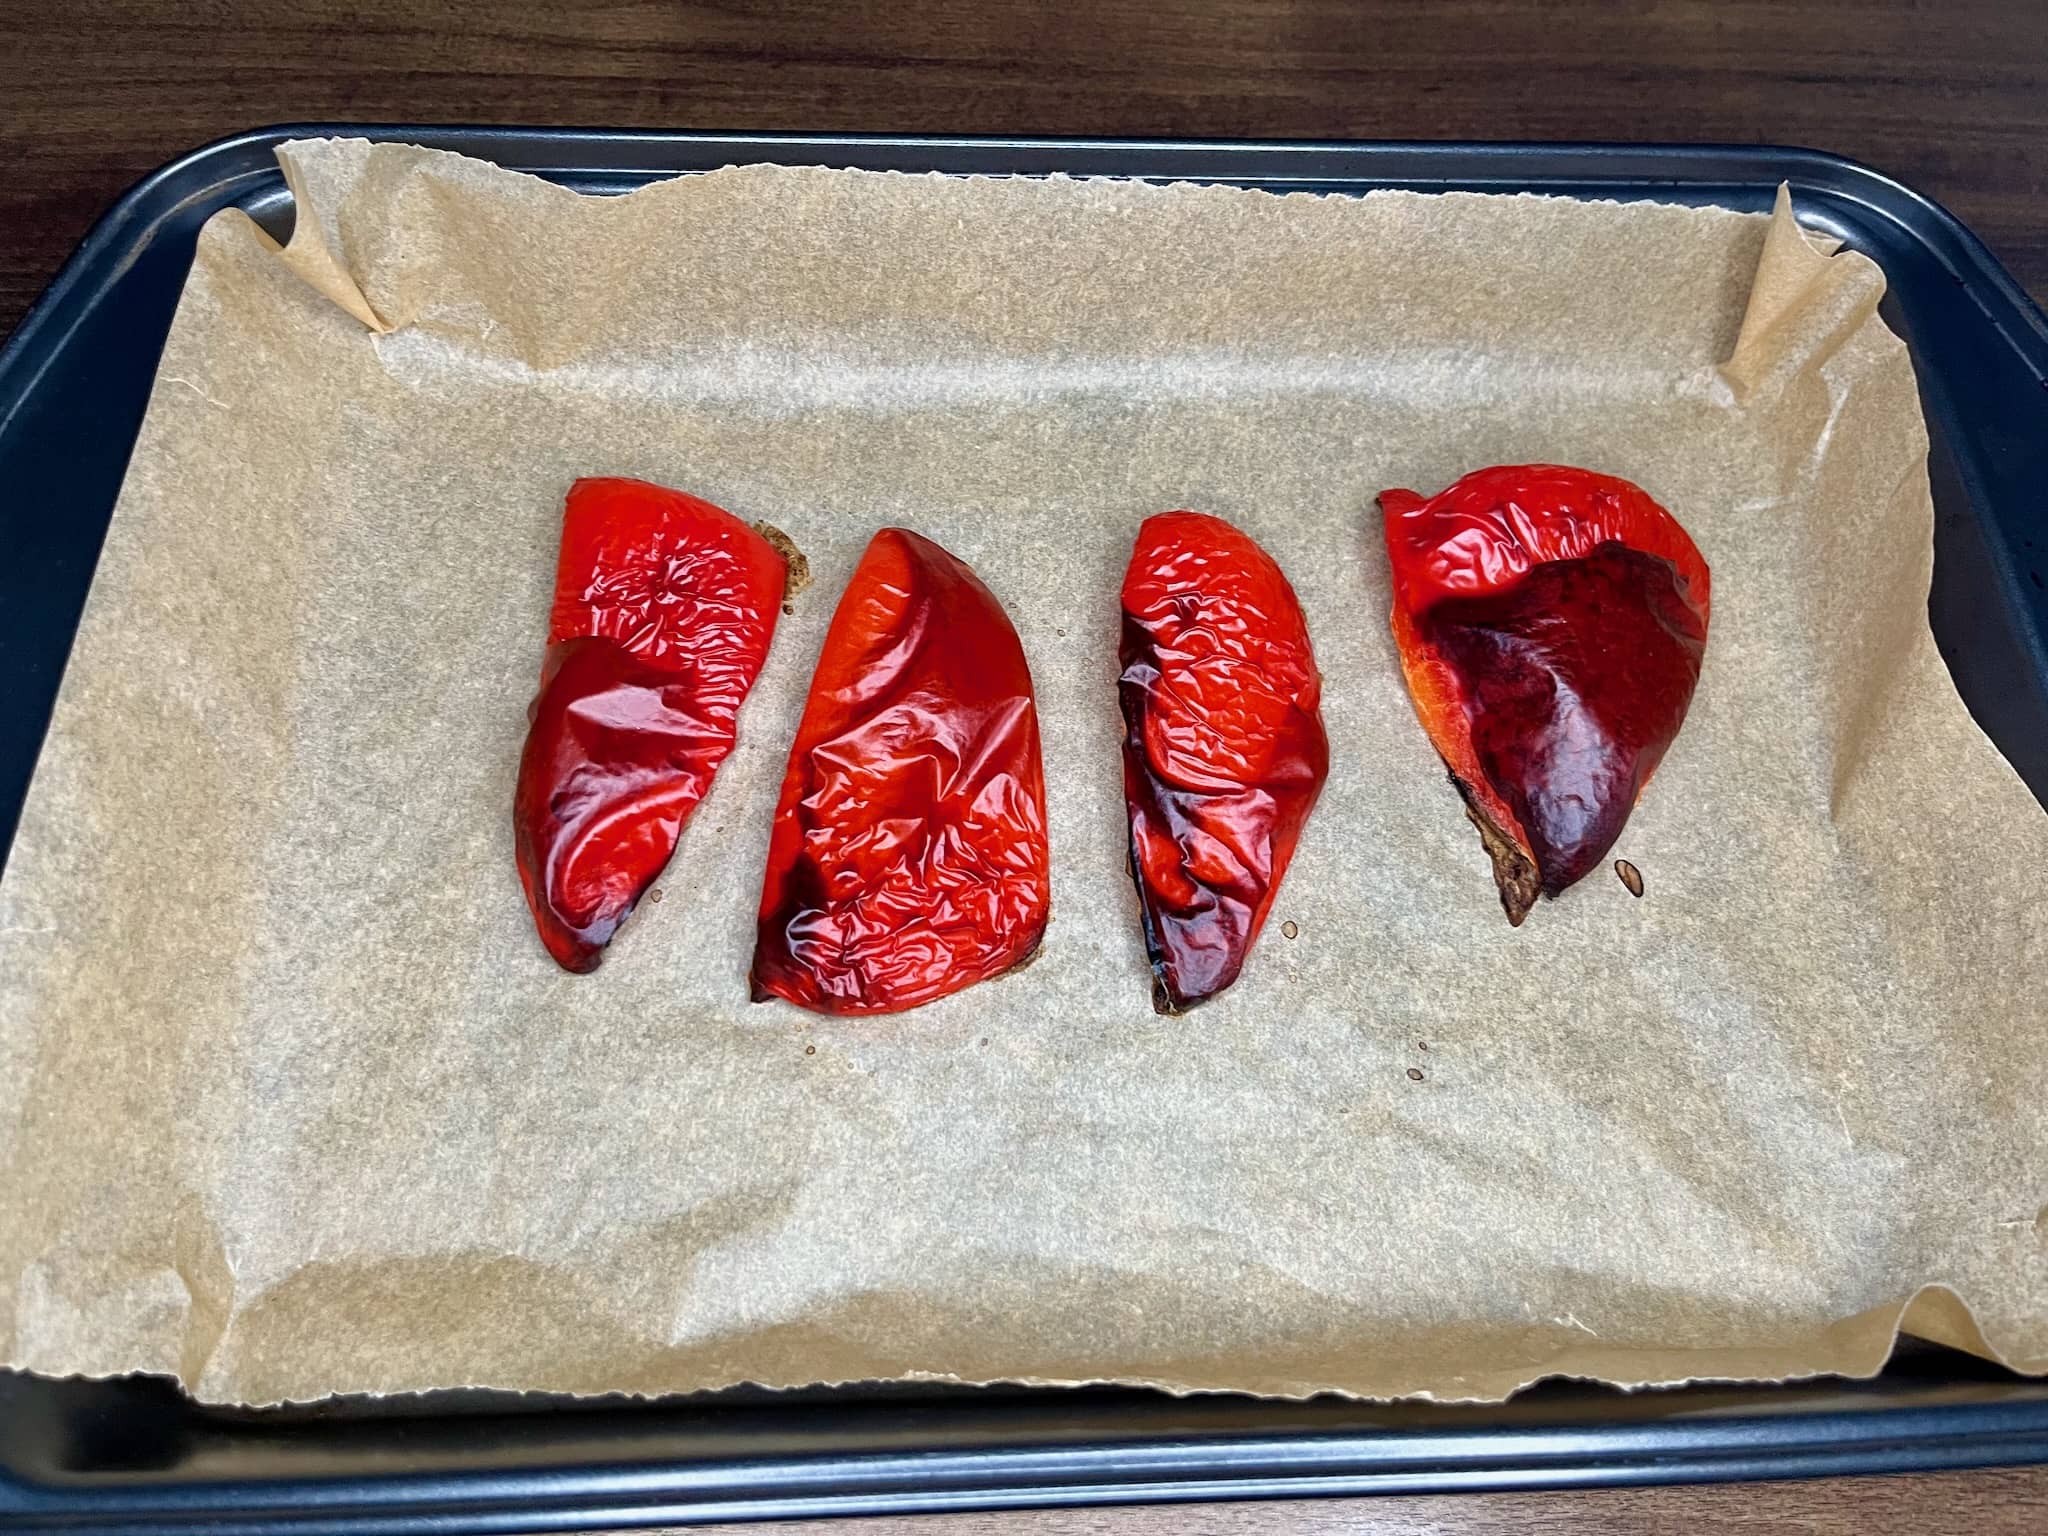 Red bell pepper, cut and placed on a baking tray, with other ingredients on the side